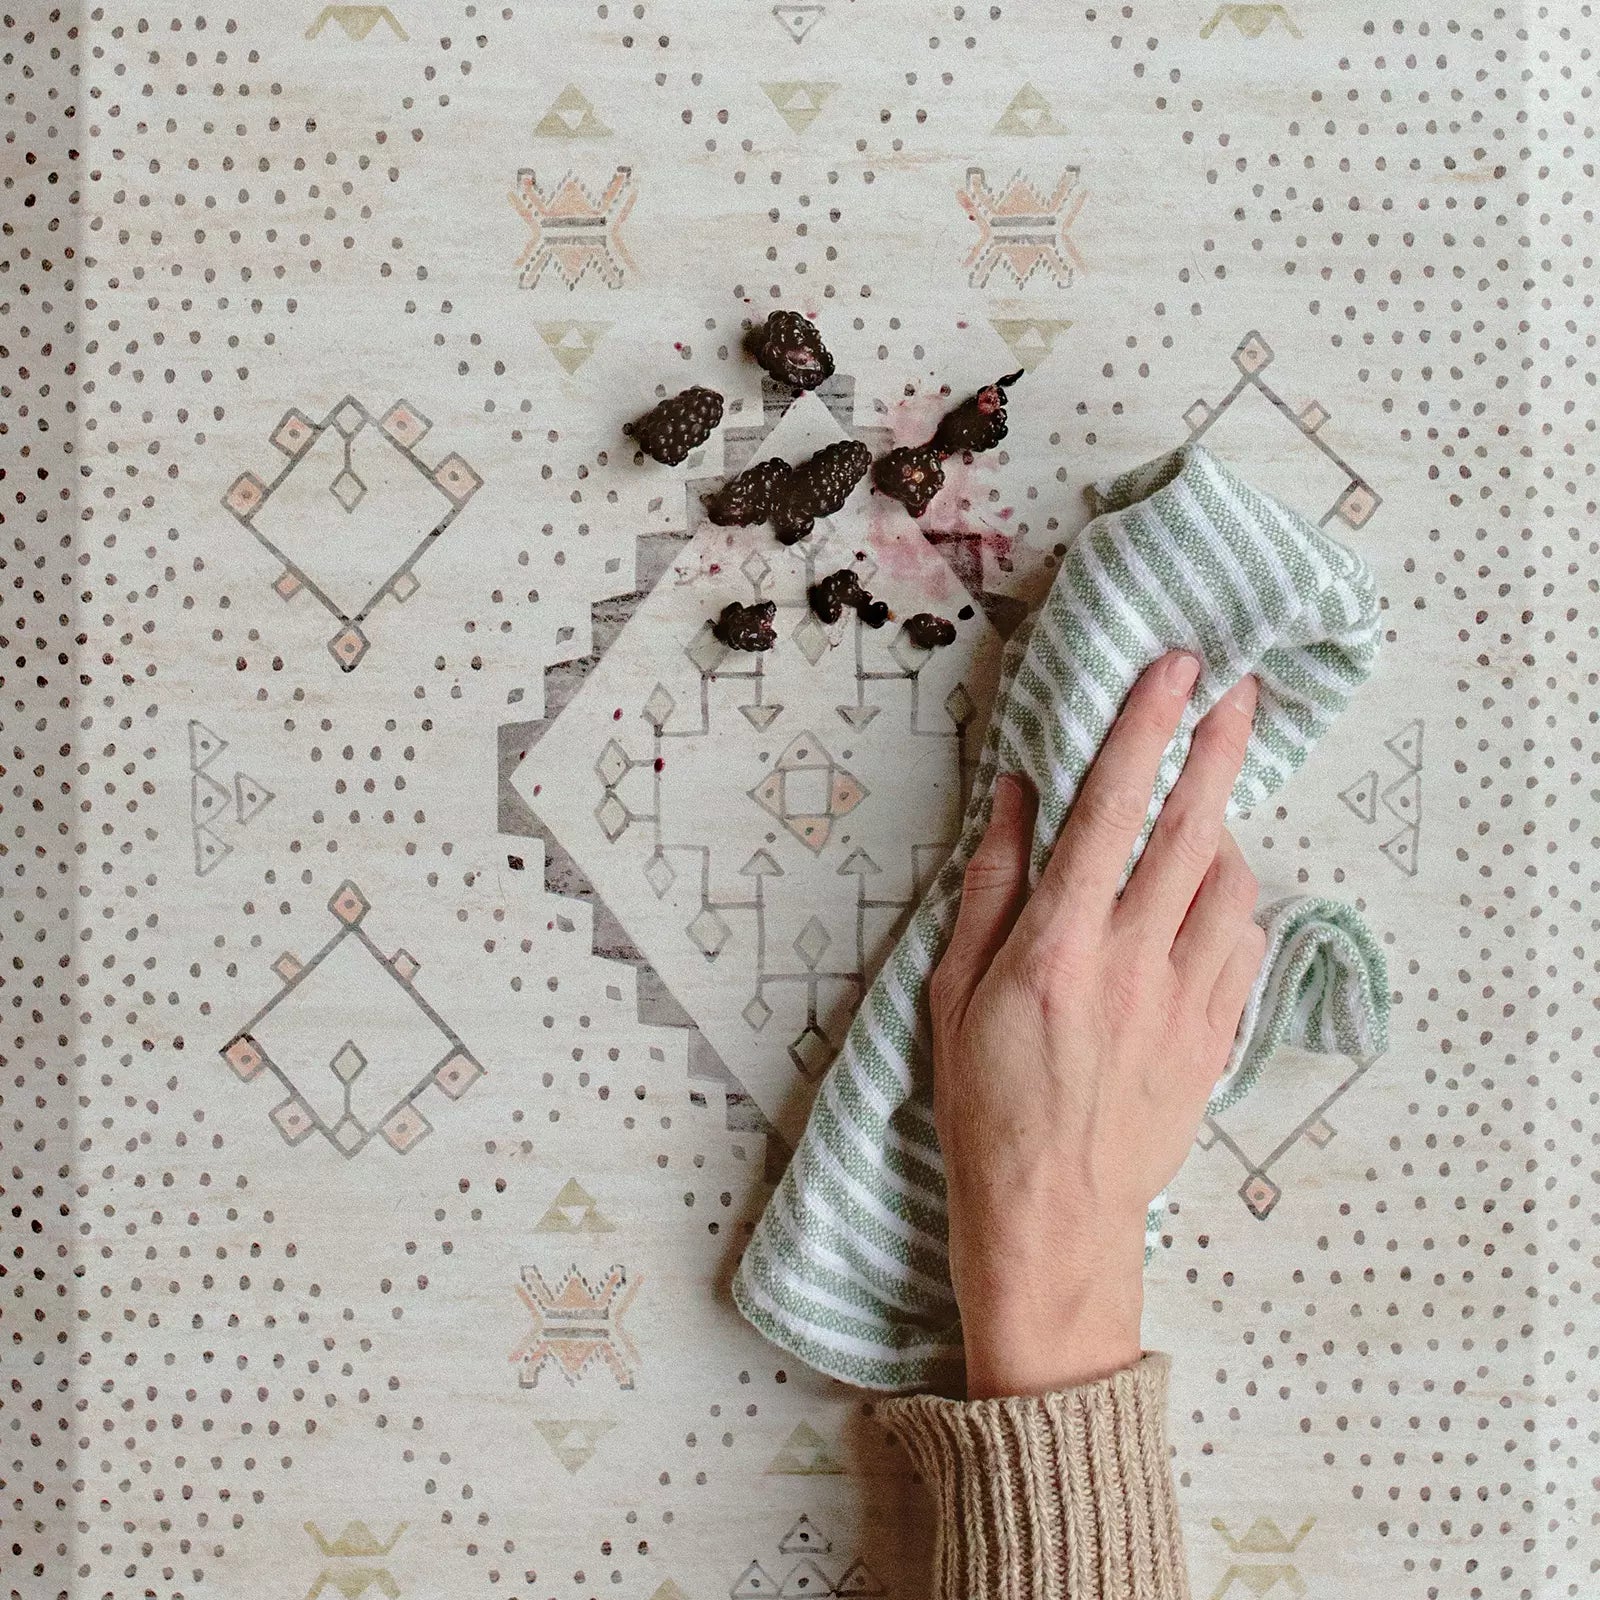 Nama Standing Mat in Ula Oat neutral boho print. Anti-fatigue kitchen mat shown close up with a hand wiping up a spill with a cloth.